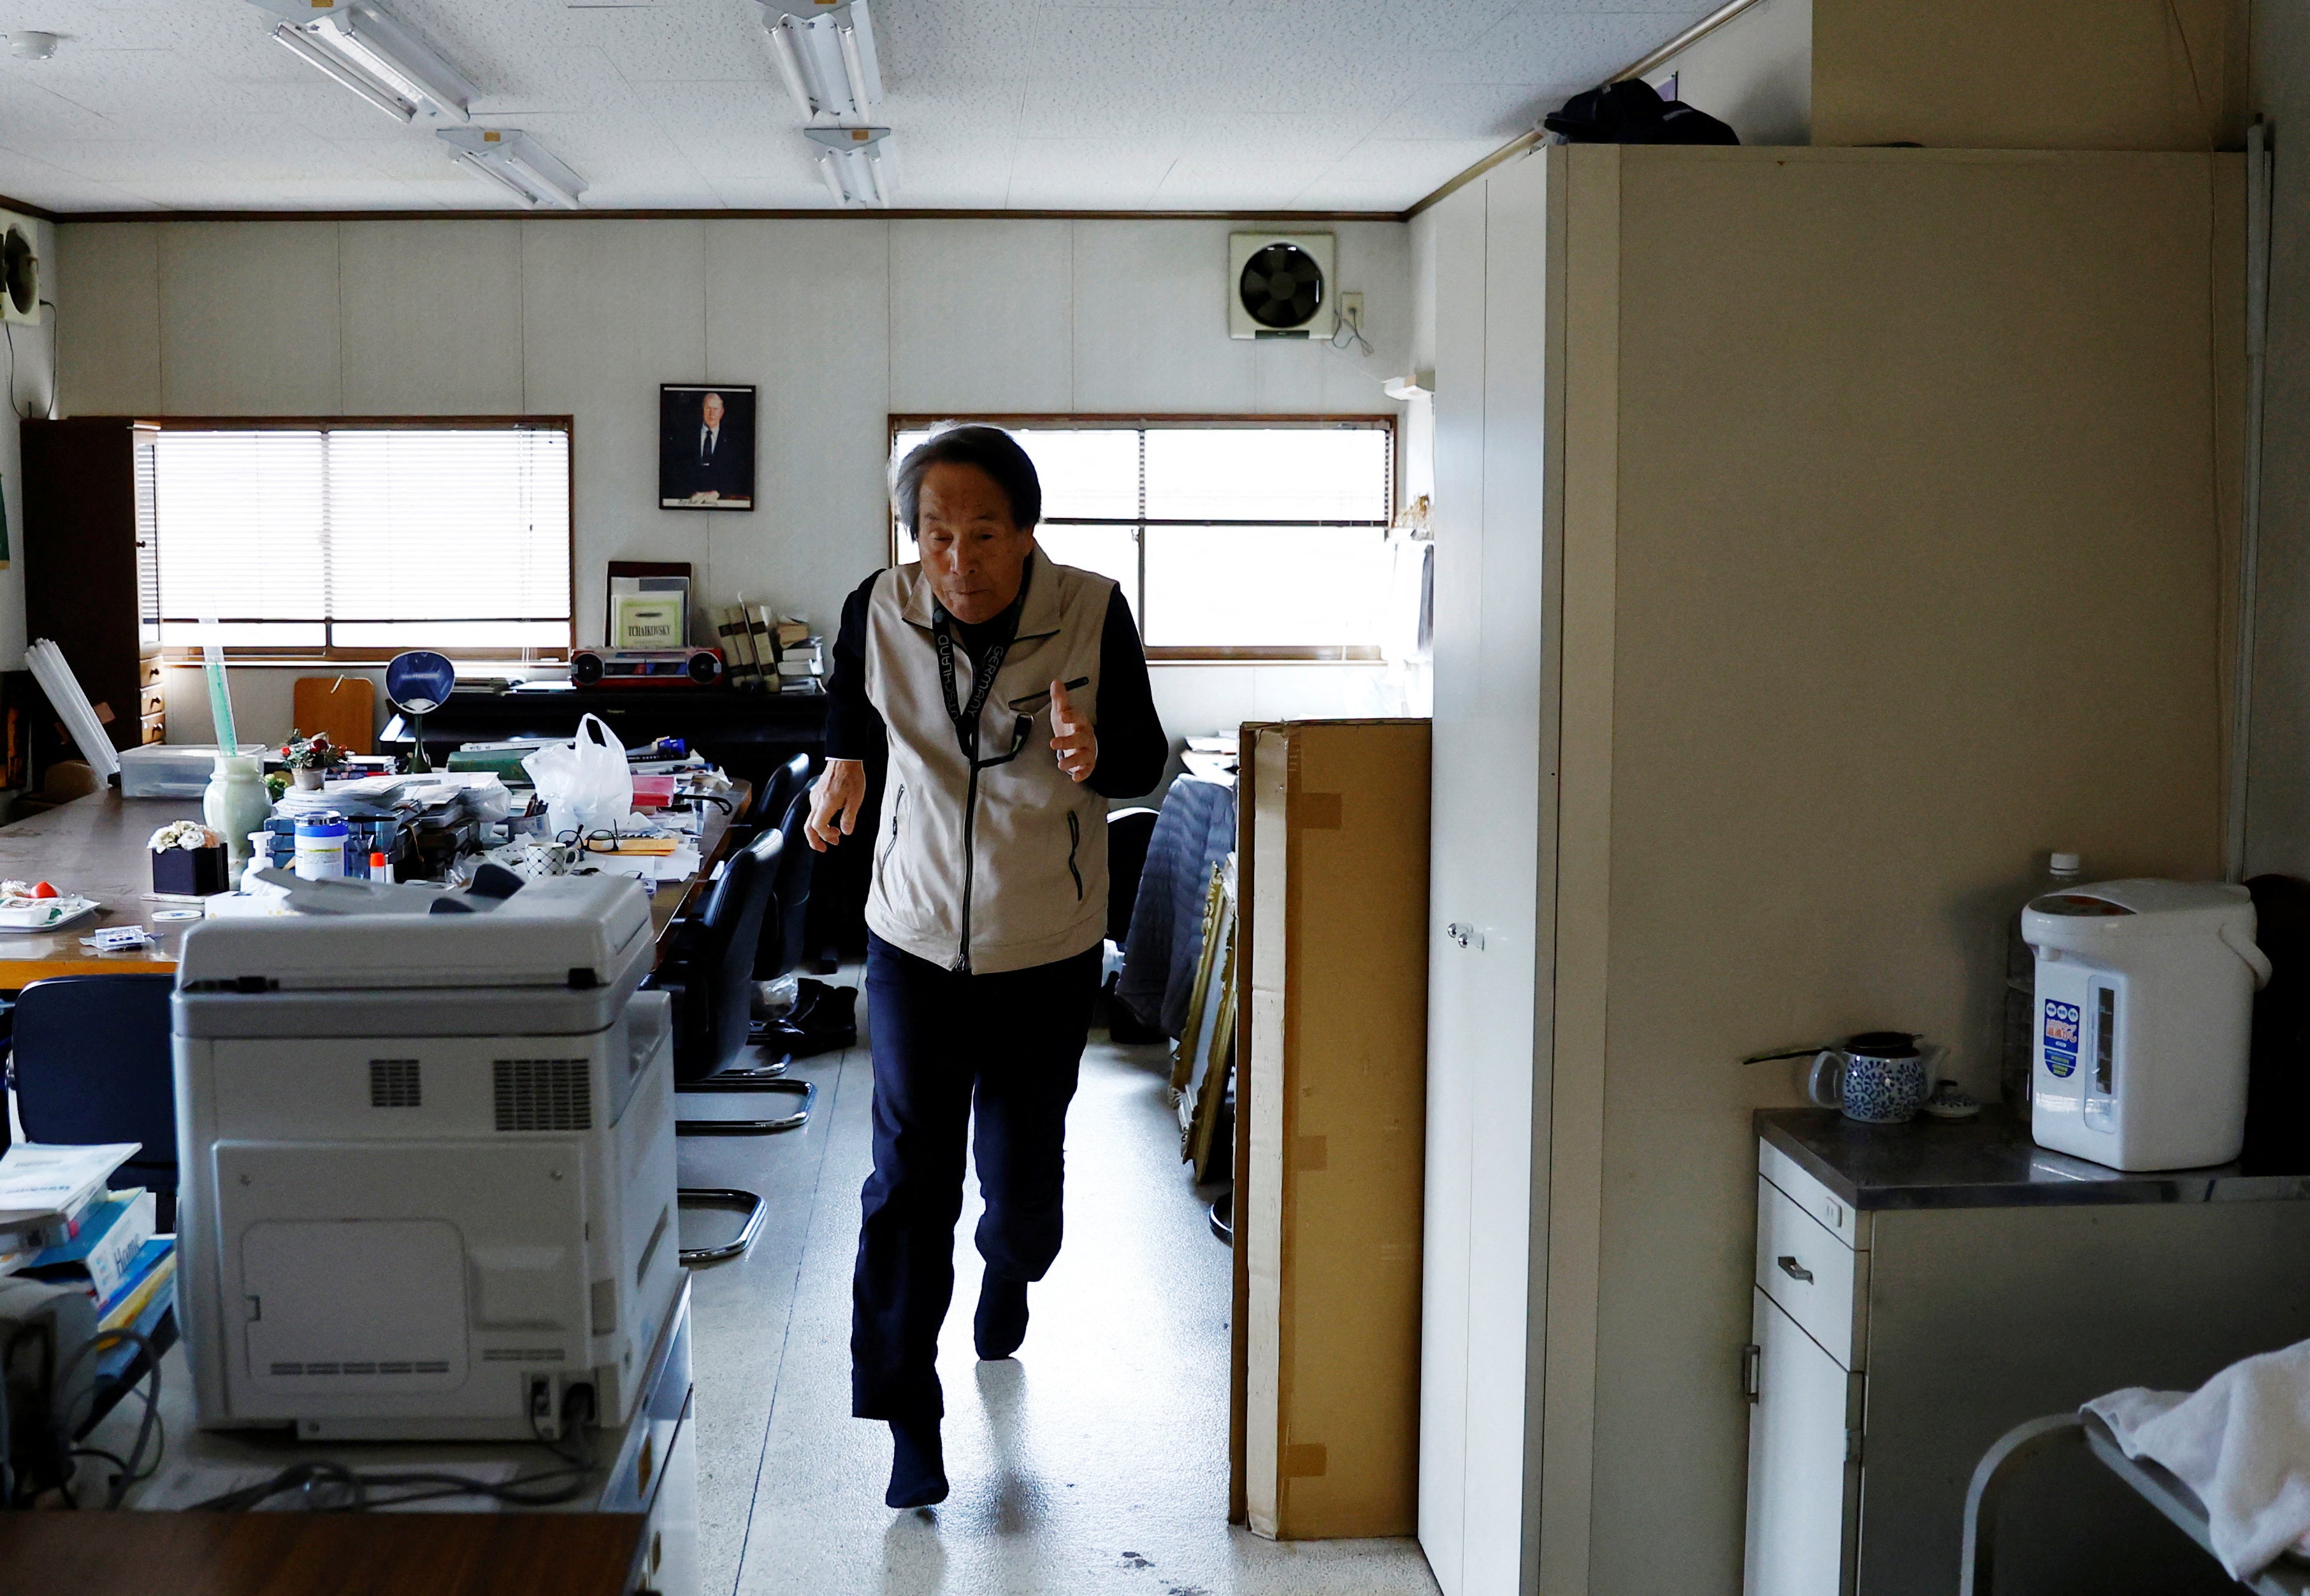 Shingo sprints in his office to keep fit at his office in Tokyo